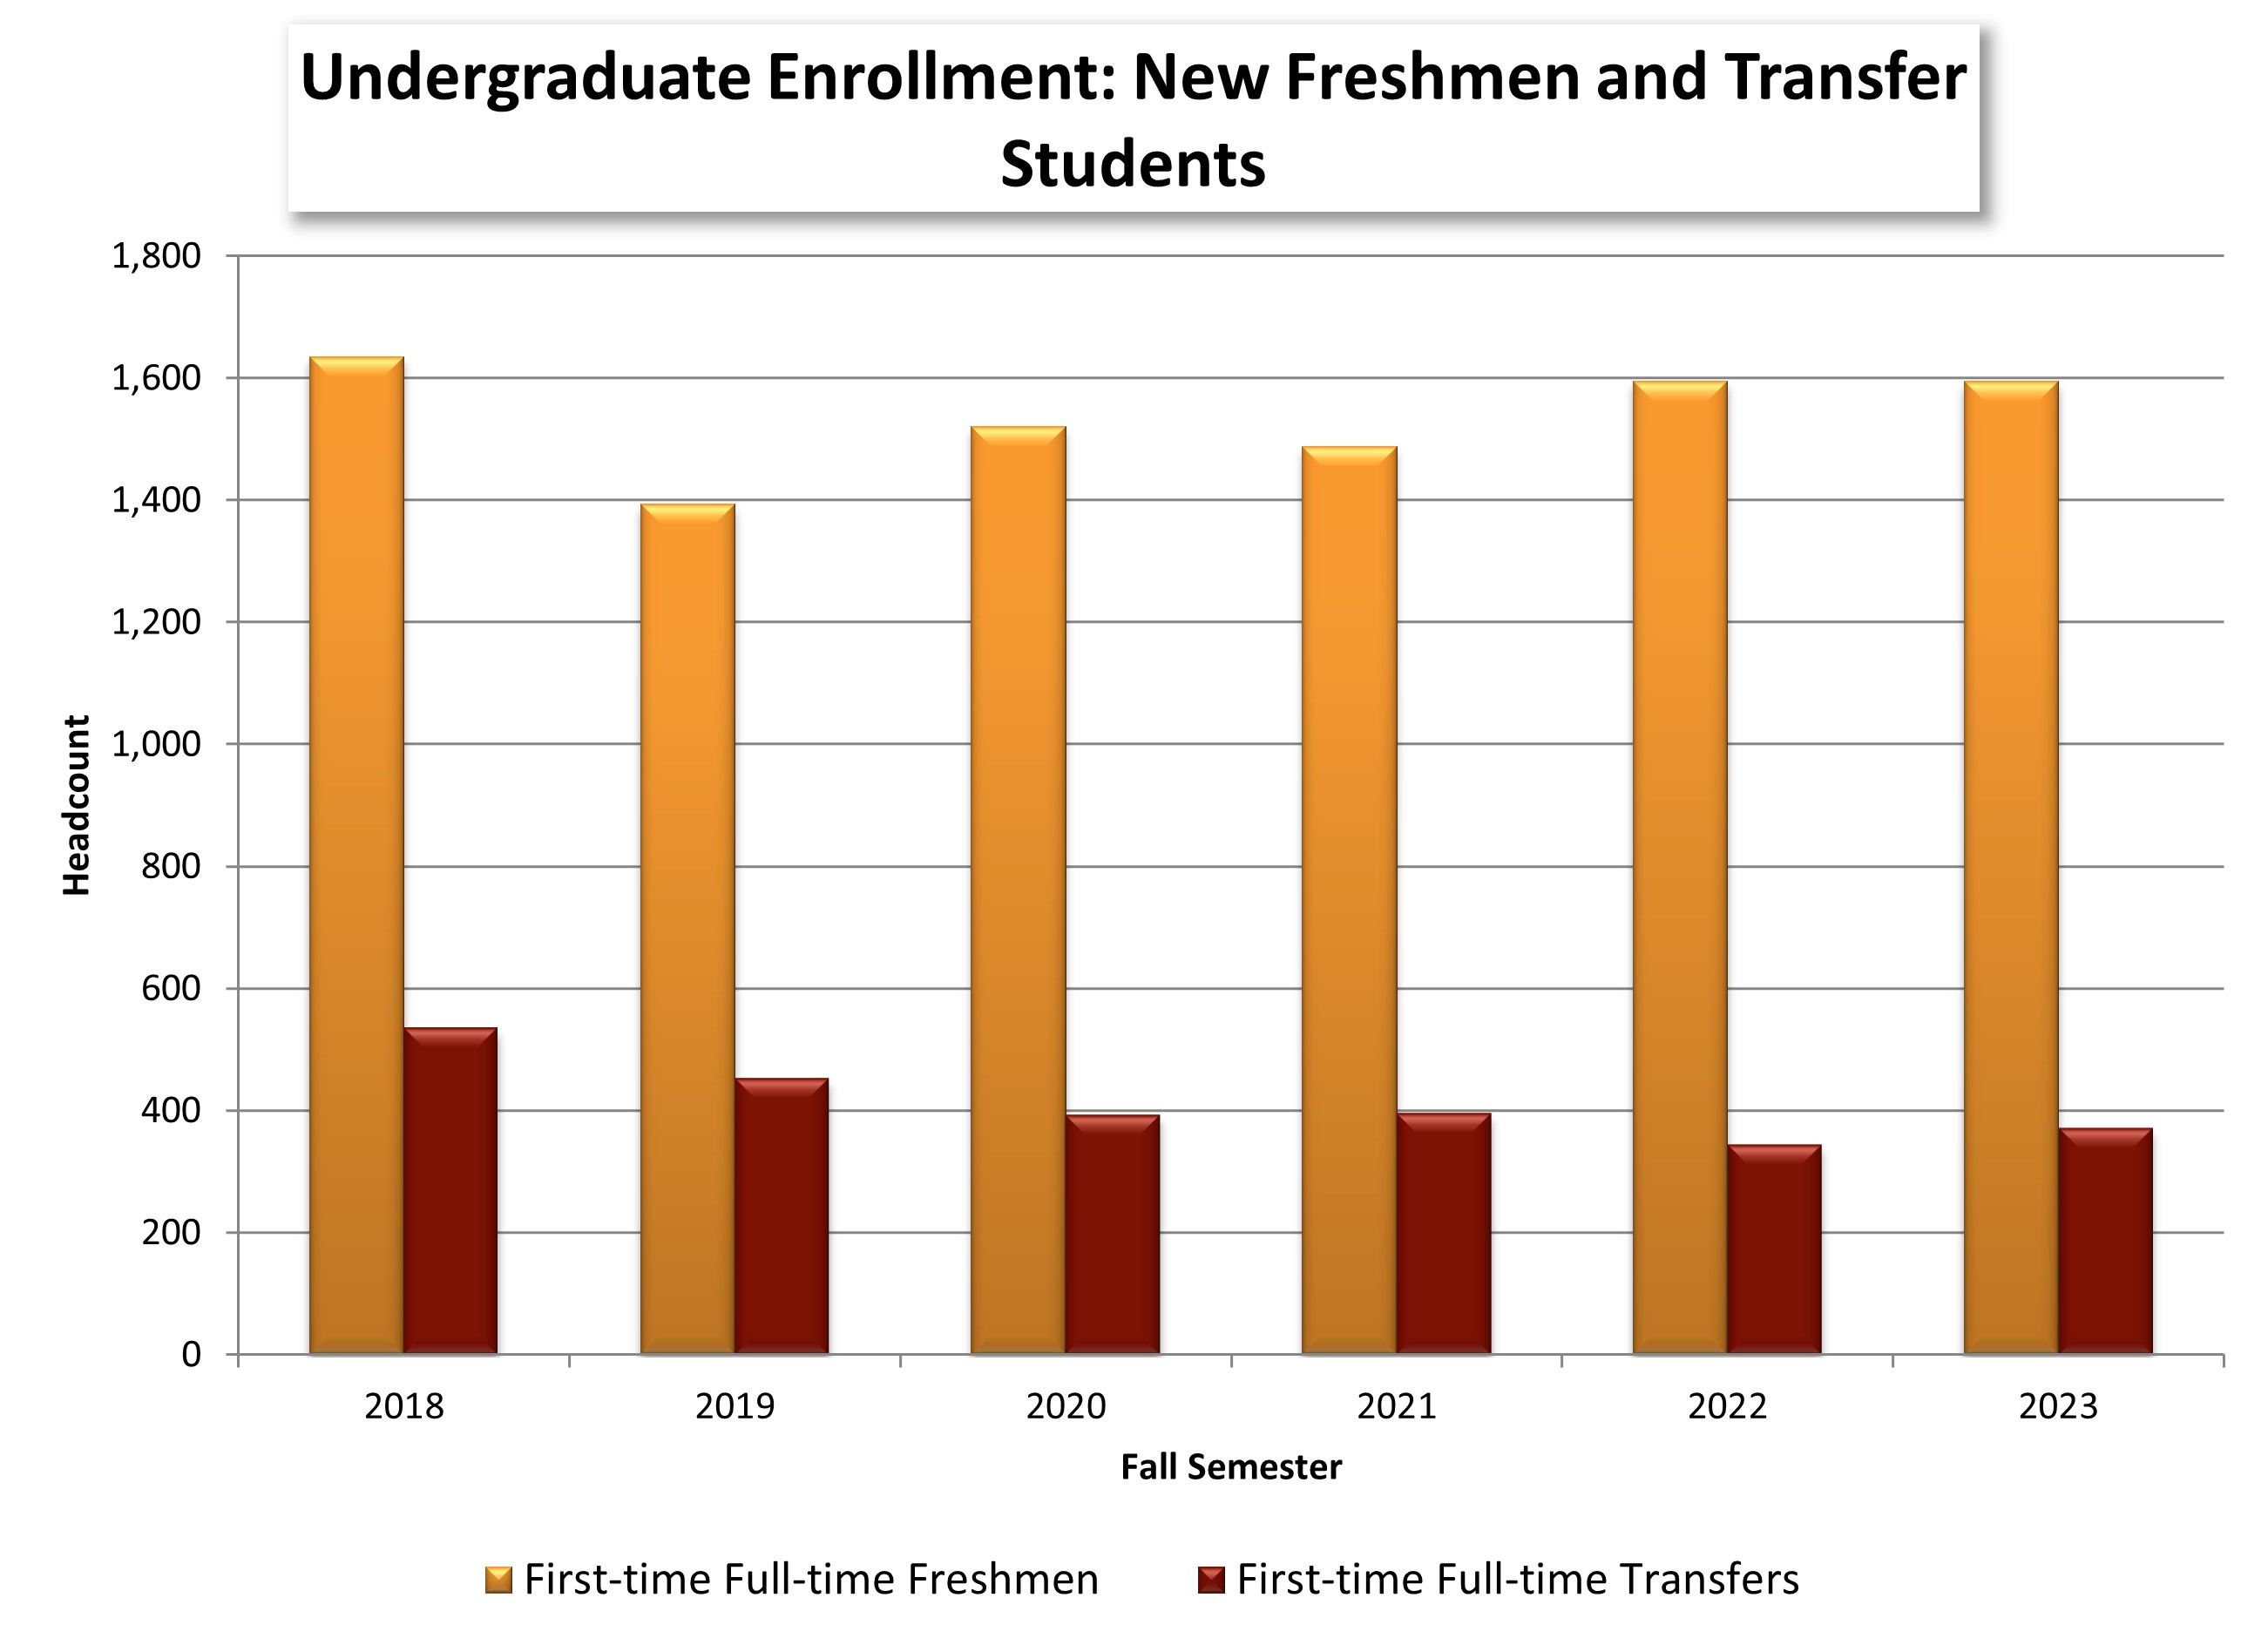 Undergraduate Enrollment First-time Freshmen and Transfer Students